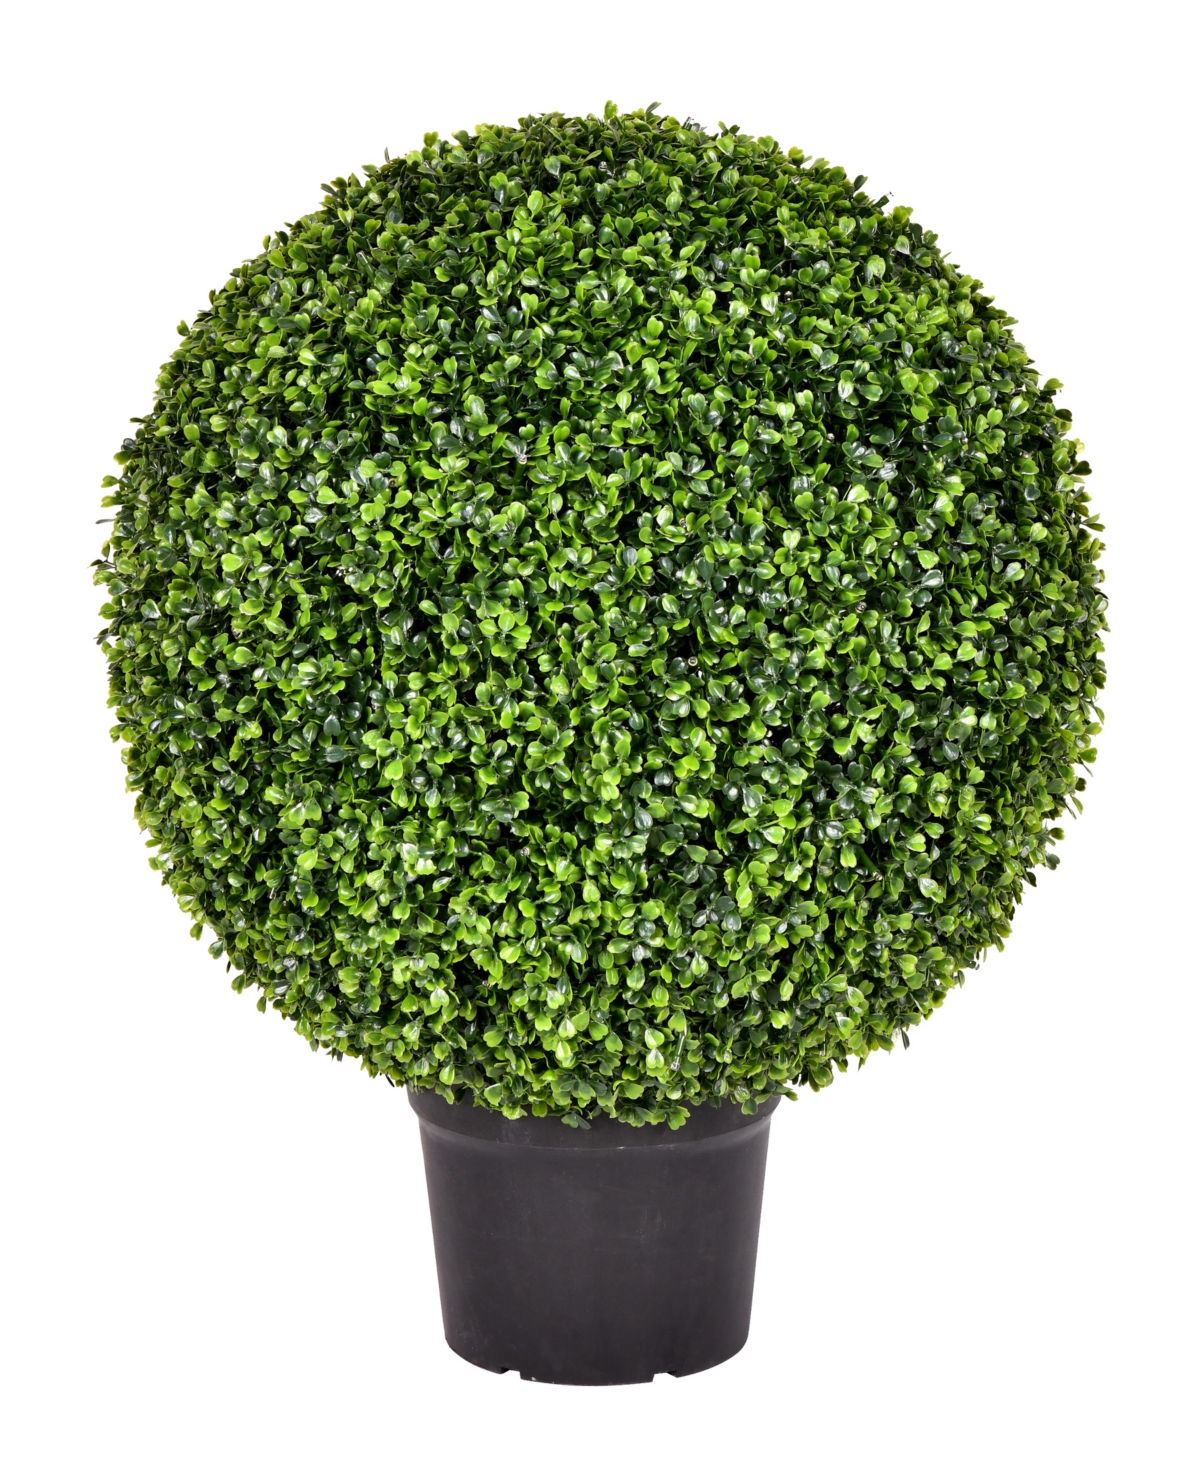 24" Artificial Potted Green Boxwood Ball